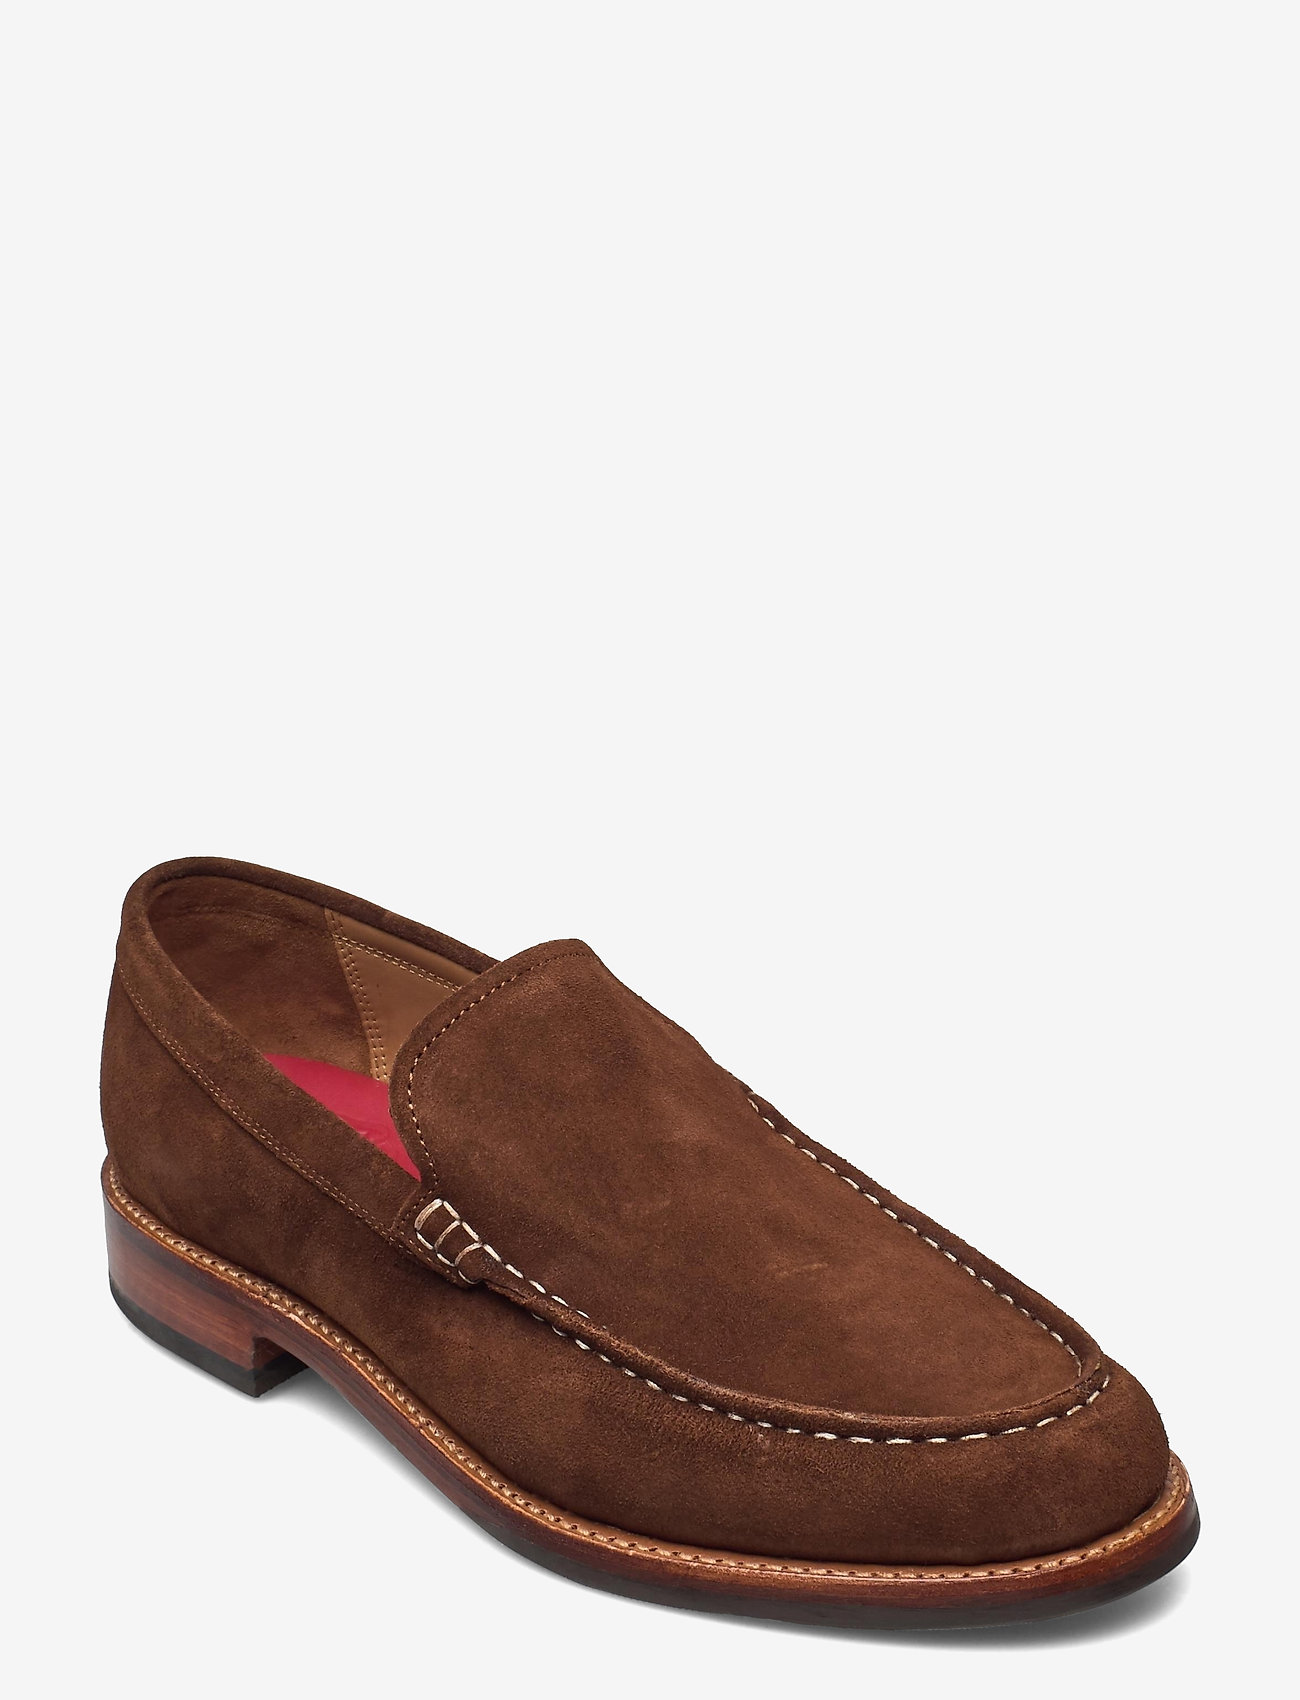 grenson suede loafers